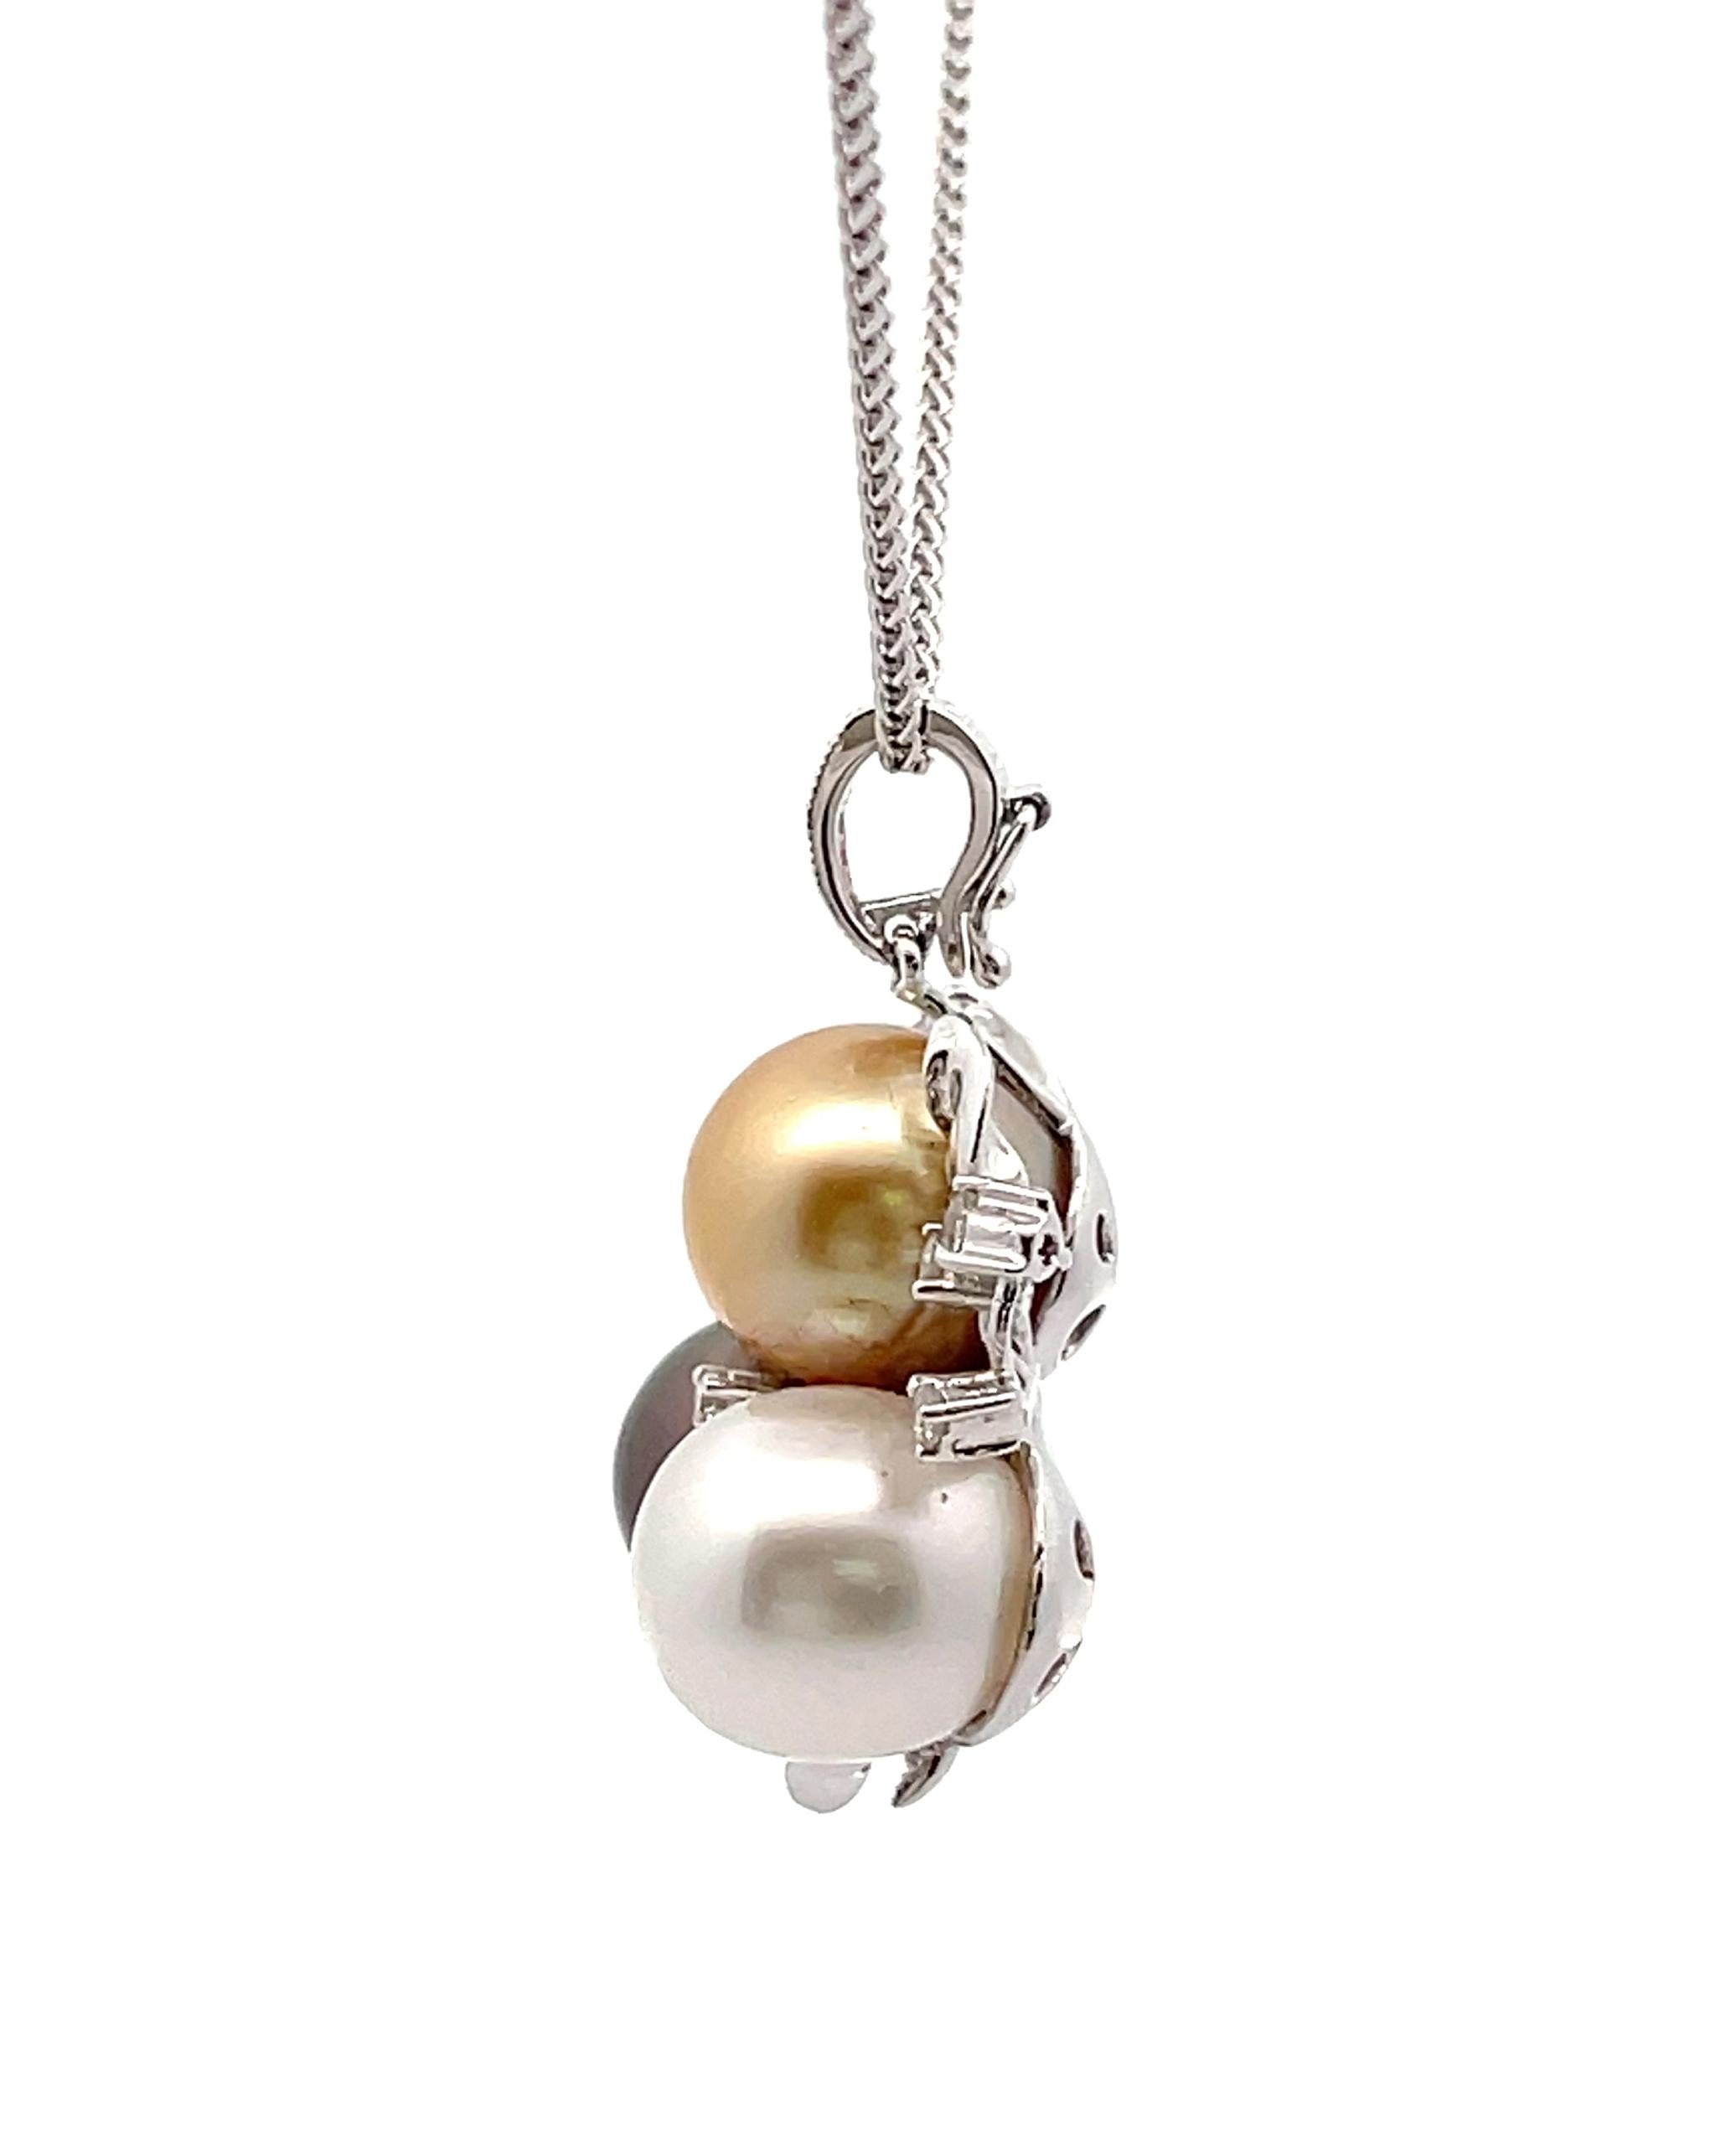 18K white gold pendant with baguette and round diamonds weighing 1.20 carats total and three colors South Sea pearls measuring 10-11mm each. Colors include white South Sea, black Tahitian and golden South Sea.
Pendant slides on a 14K white gold